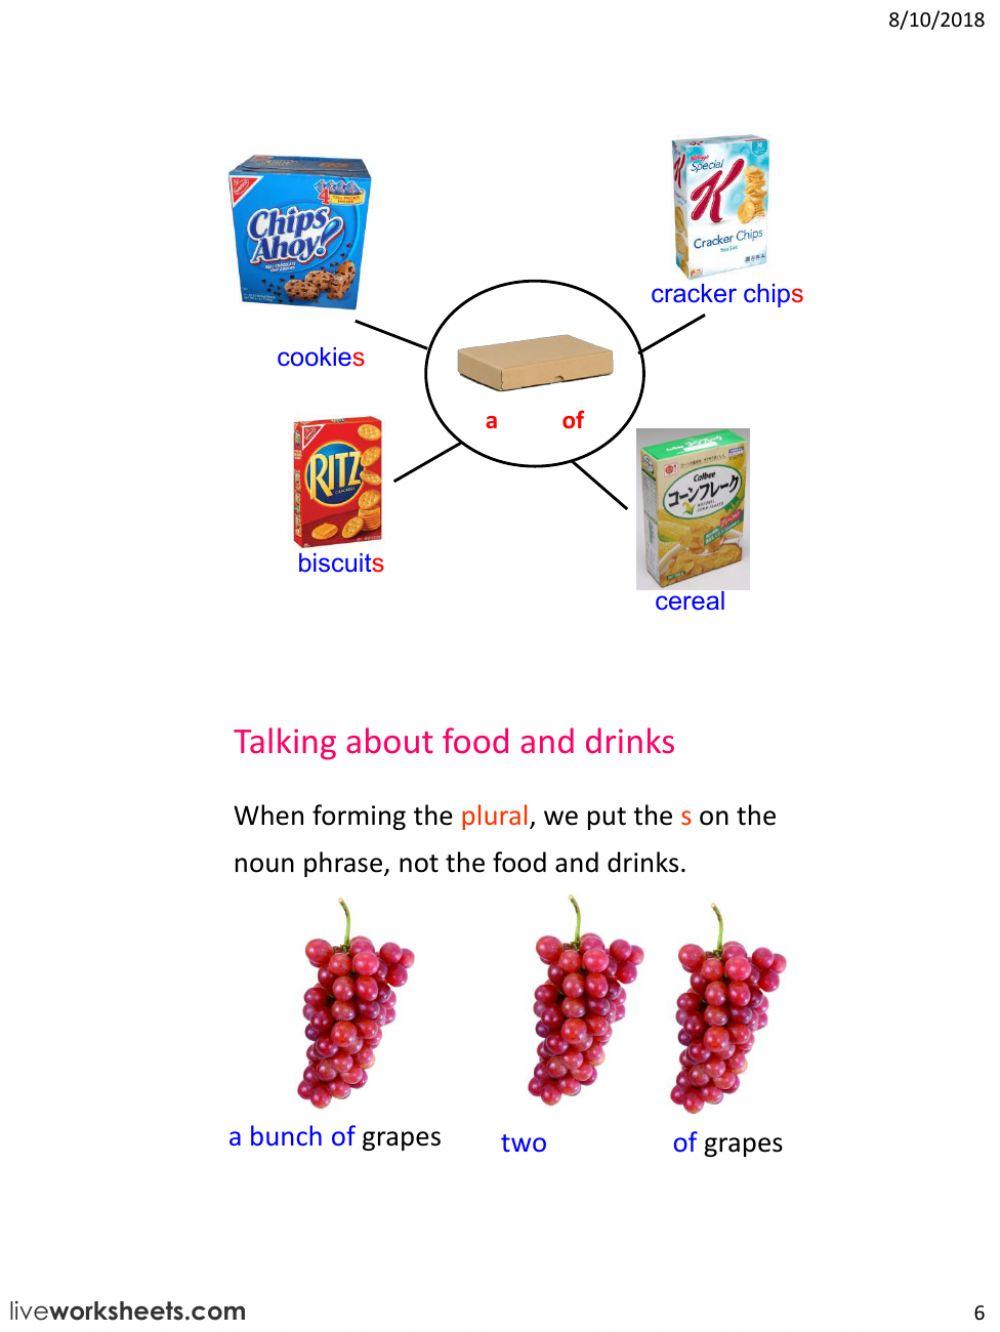 Food and drinks phrases of quantity